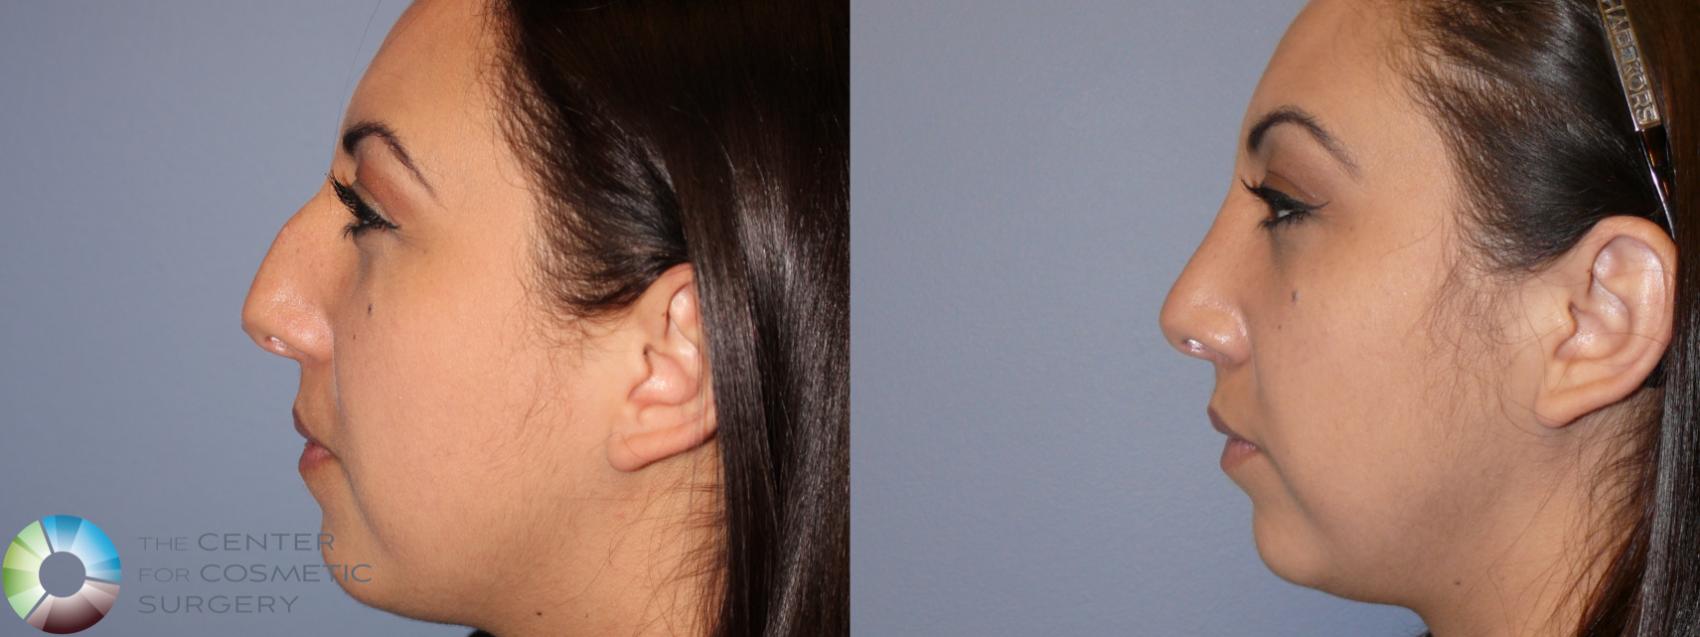 Before & After Rhinoplasty Case 11637 Left Side in Denver and Colorado Springs, CO